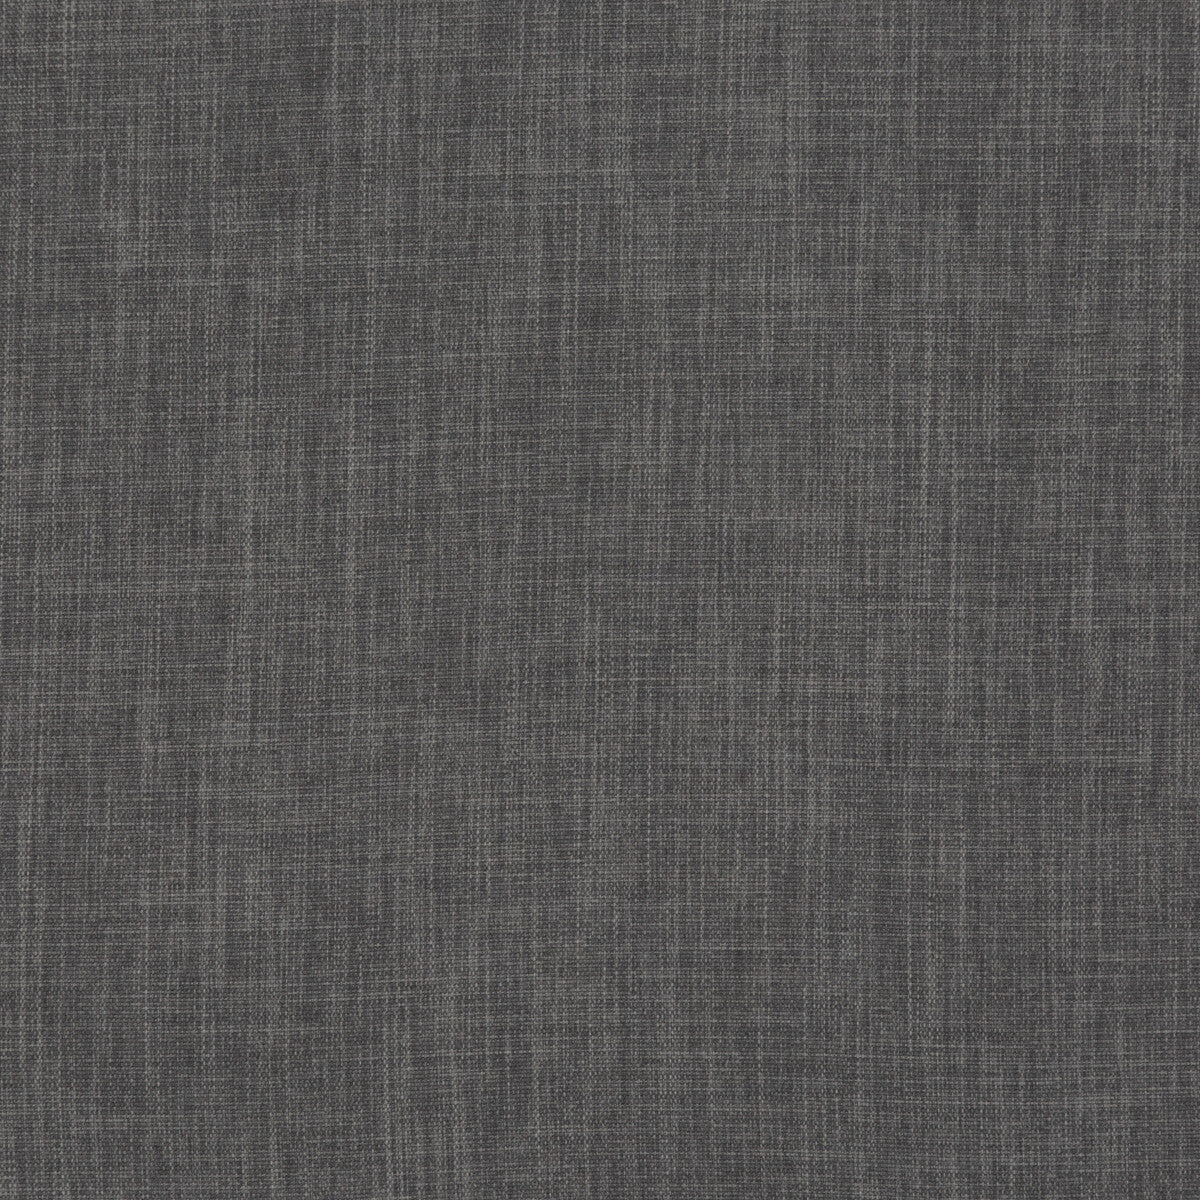 Fernshaw fabric in graphite color - pattern PF50410.970.0 - by Baker Lifestyle in the Notebooks collection